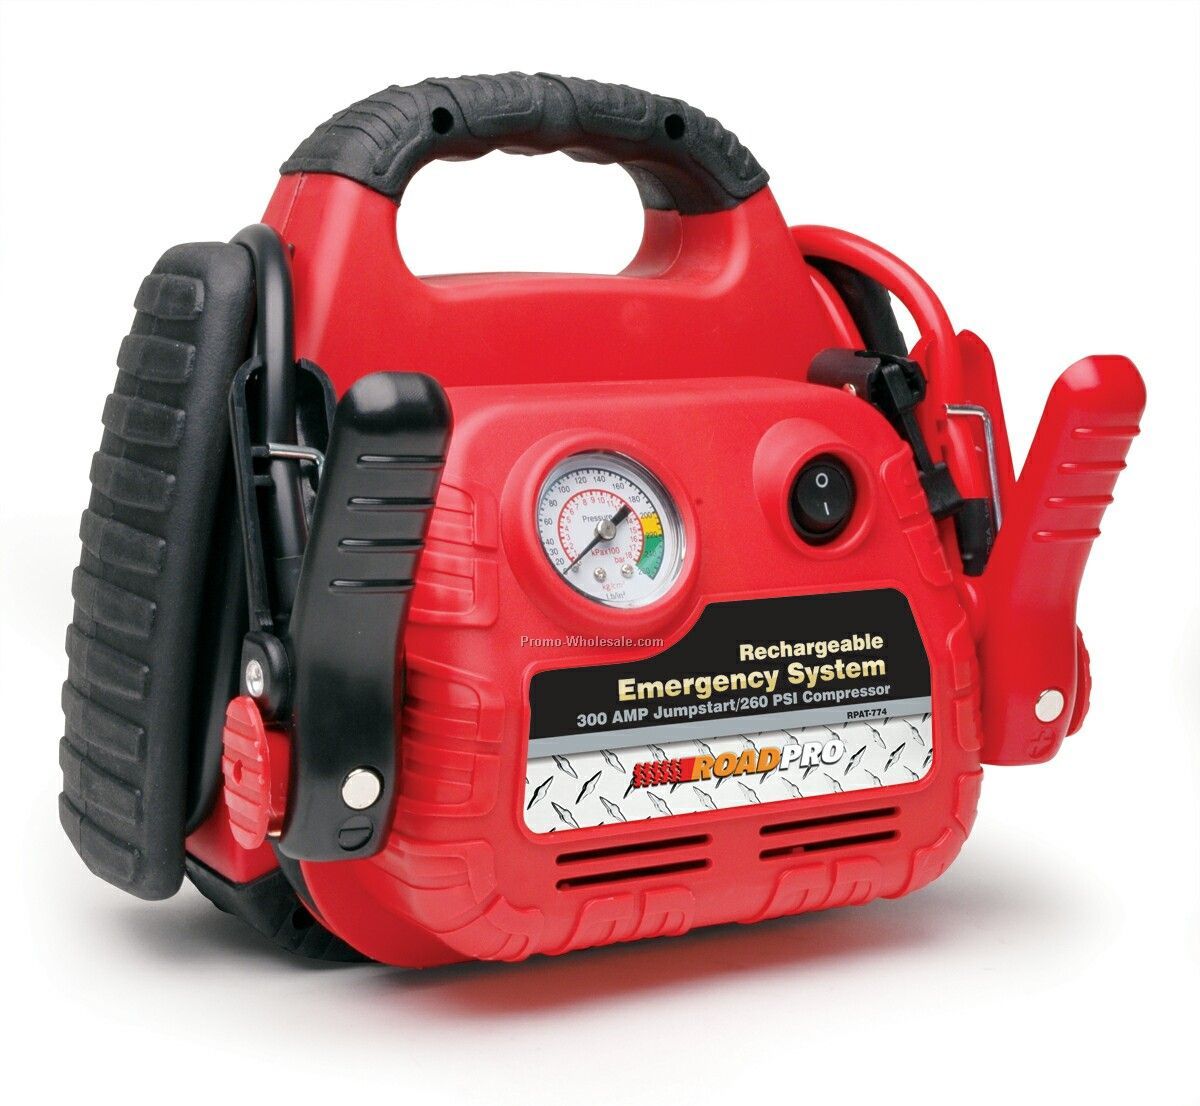 Rechargeable Emergency Jumpstart System With Air Compressor